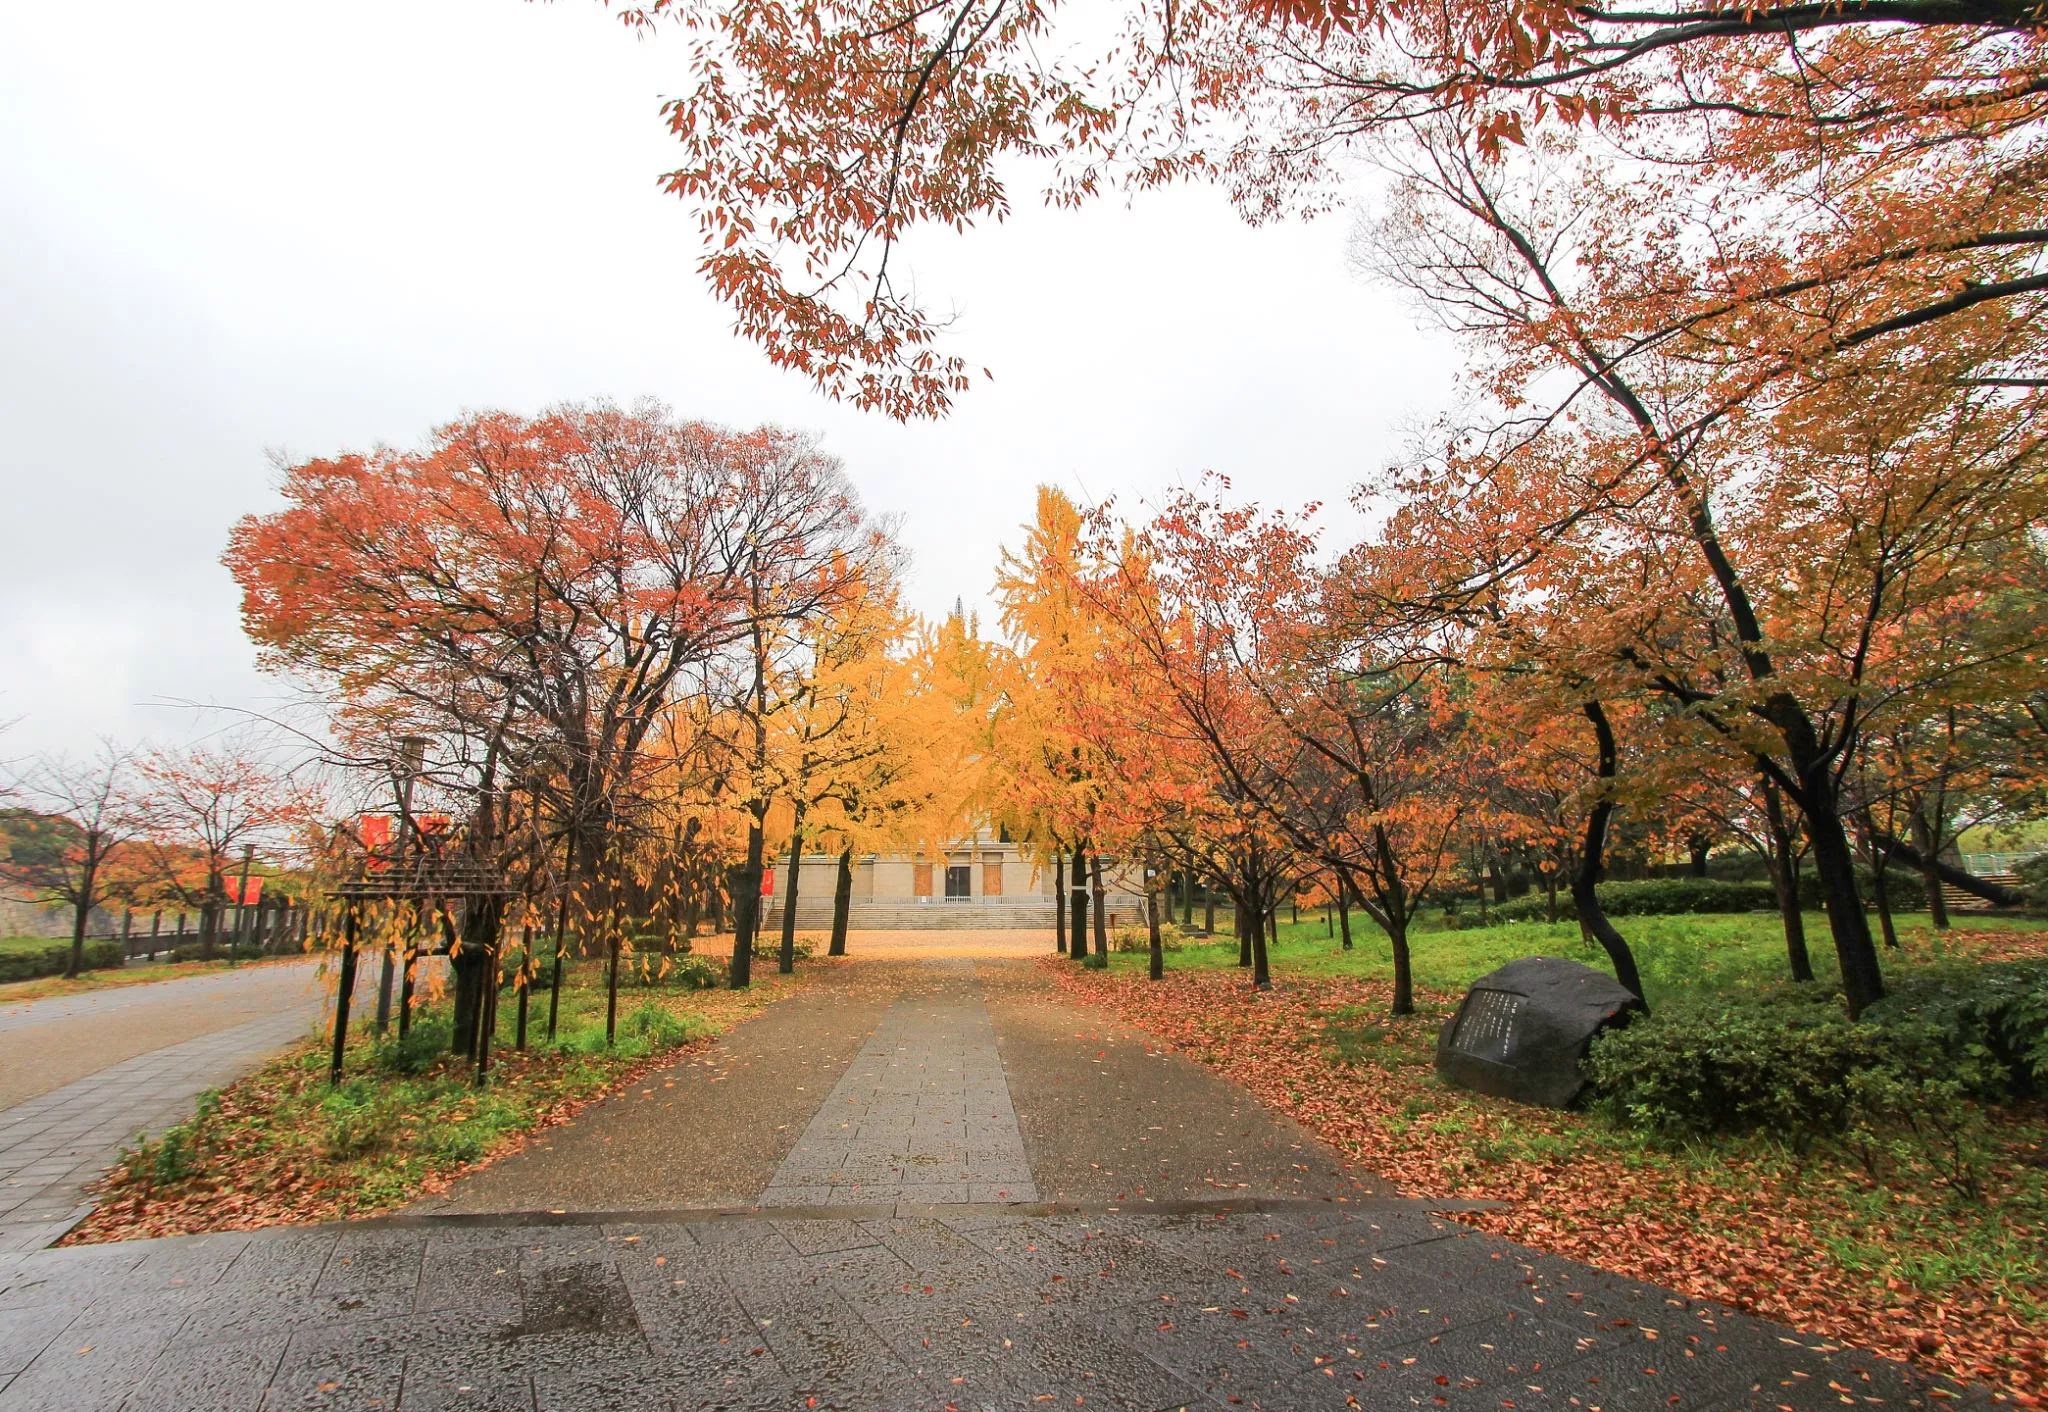 Osaka Castle Park in Japan, East Asia | Parks - Rated 4.4